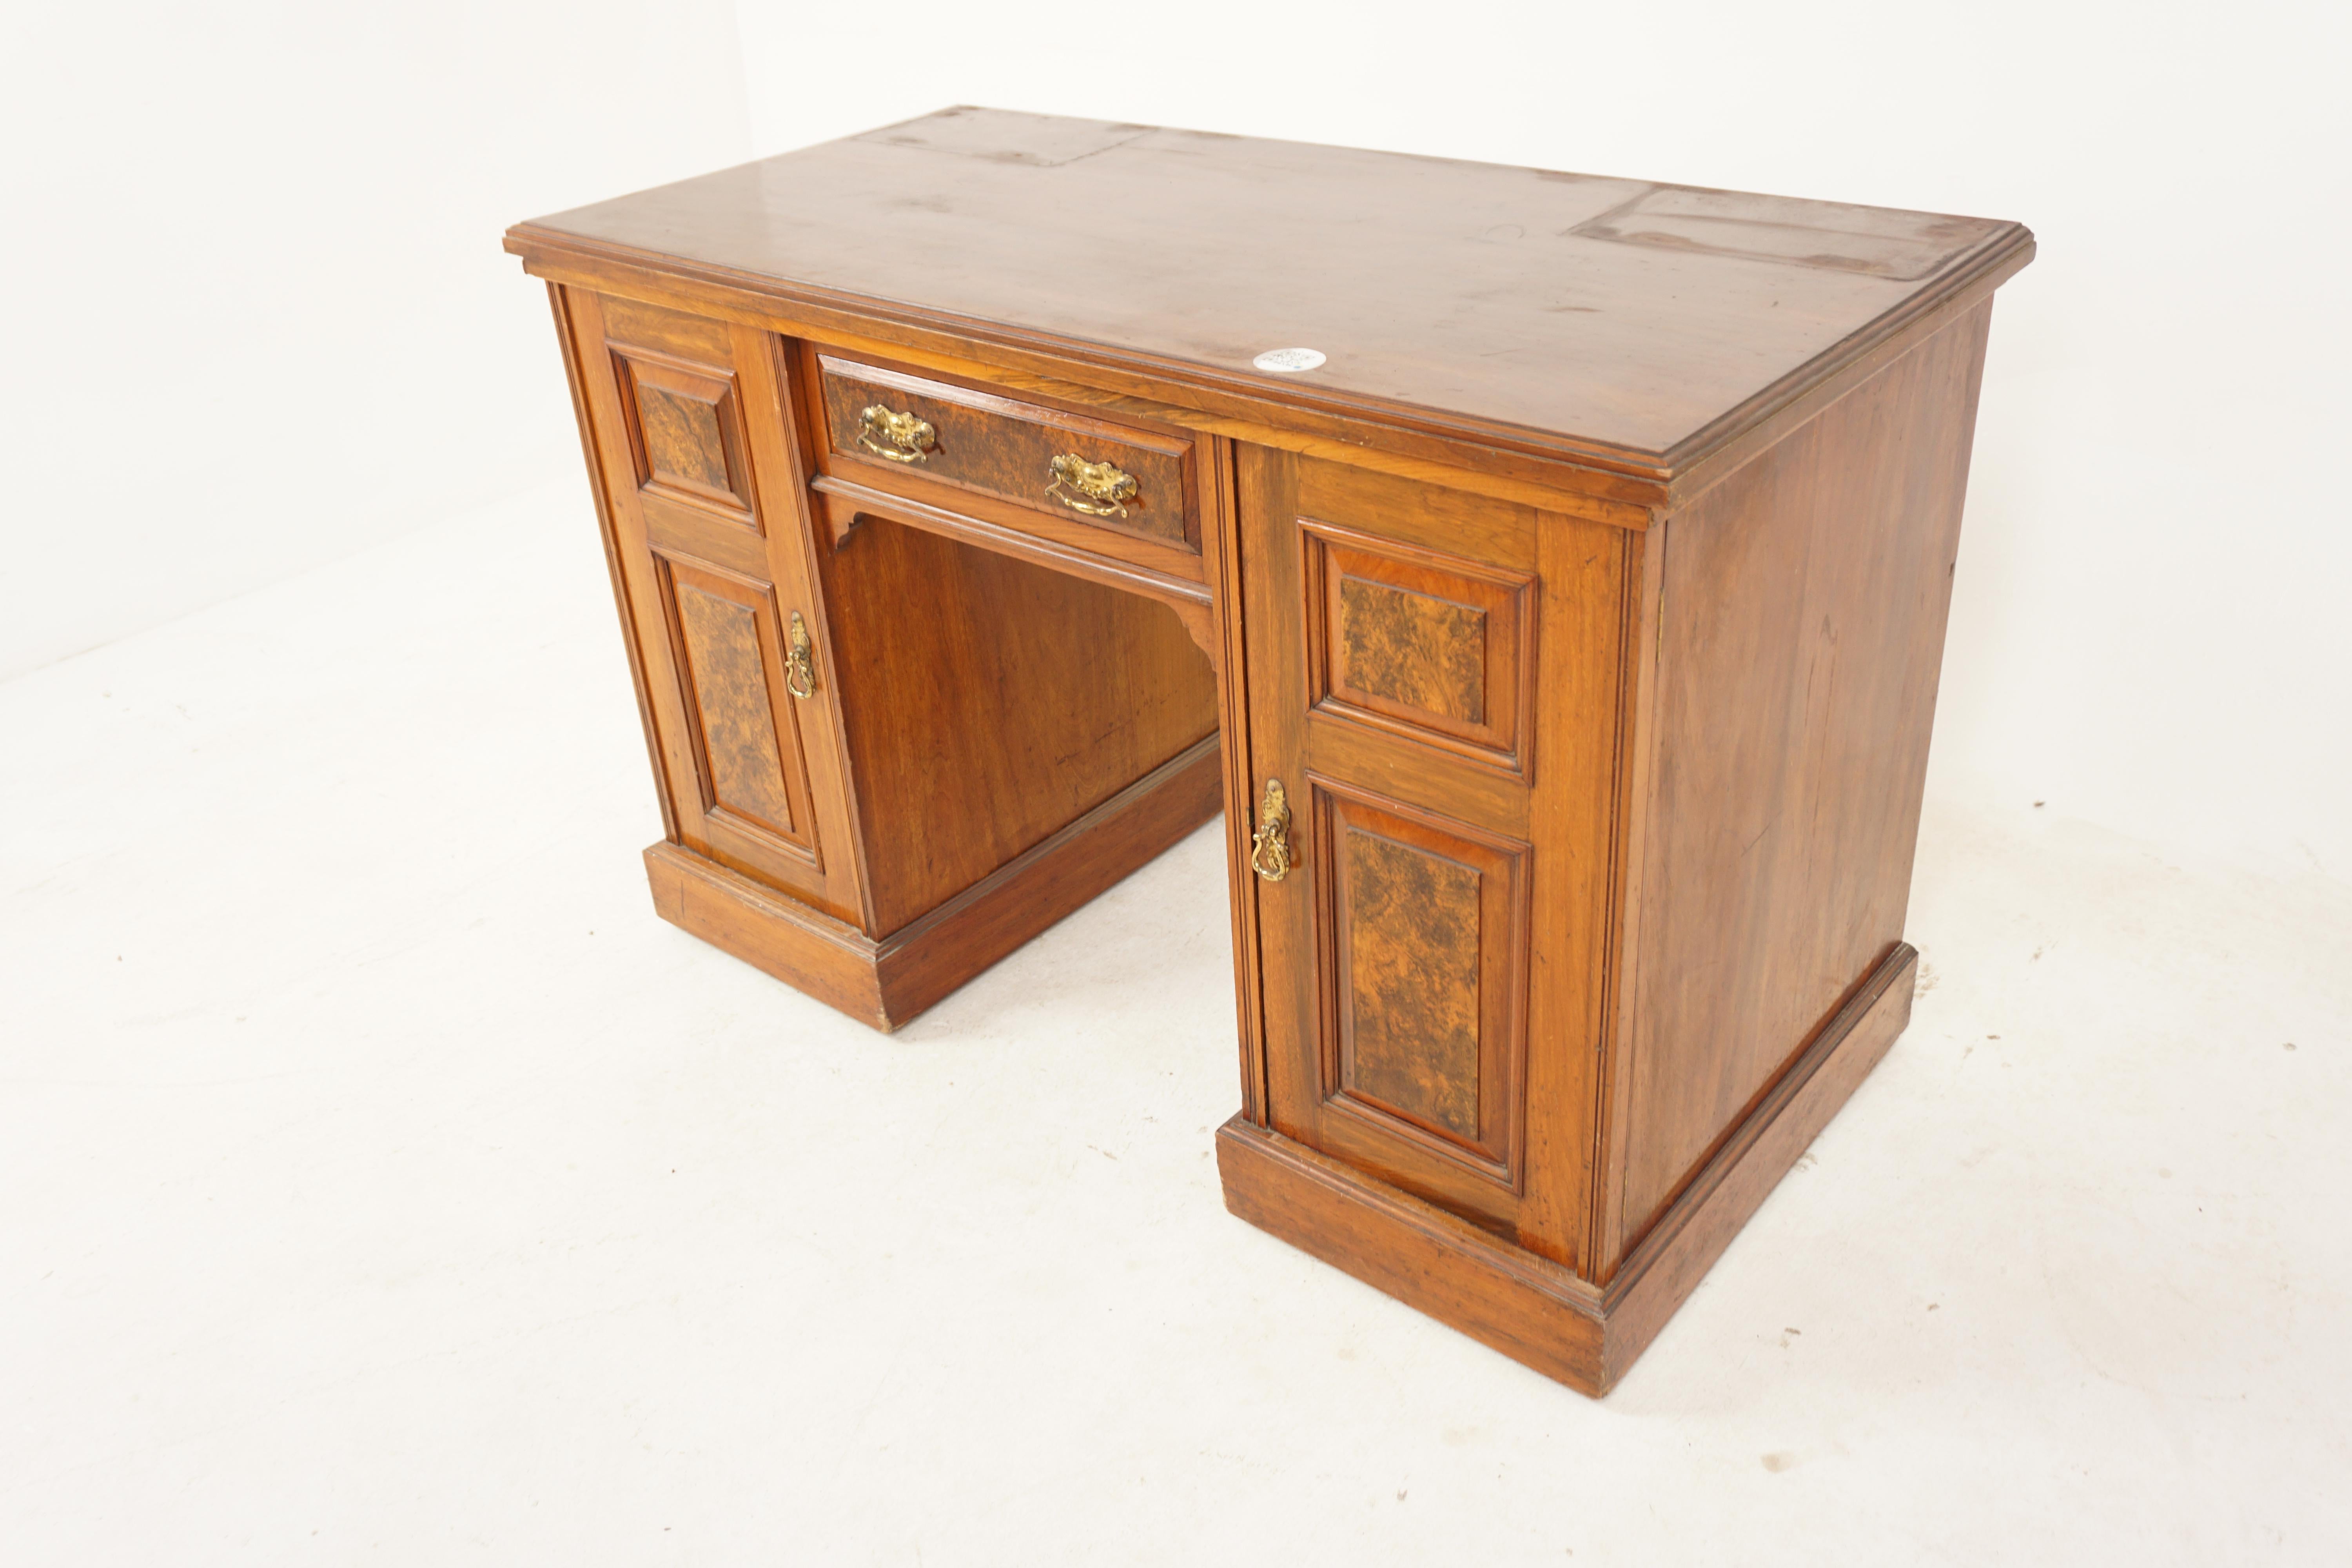 Victorian walnut double pedestal desk, writing or vanity, Scotland 1890, H216

Scotland 1890
Solid walnut and veneers
Original Finish

Rectangular moulded top
Recessed single drawer underneath
Flank by a pair of burr walnut panelled